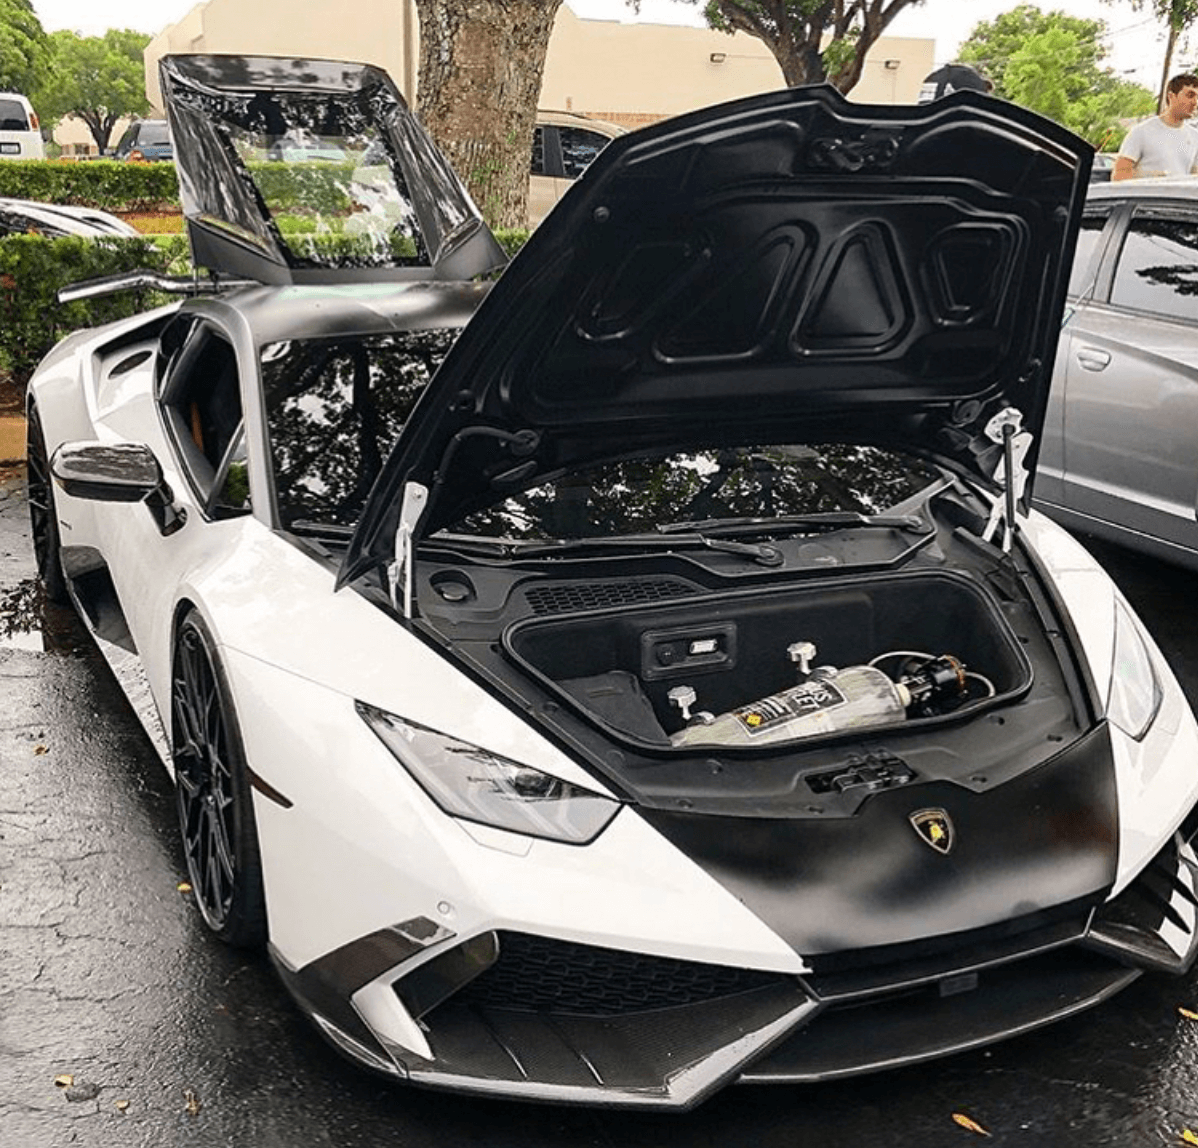 car shows in south florida